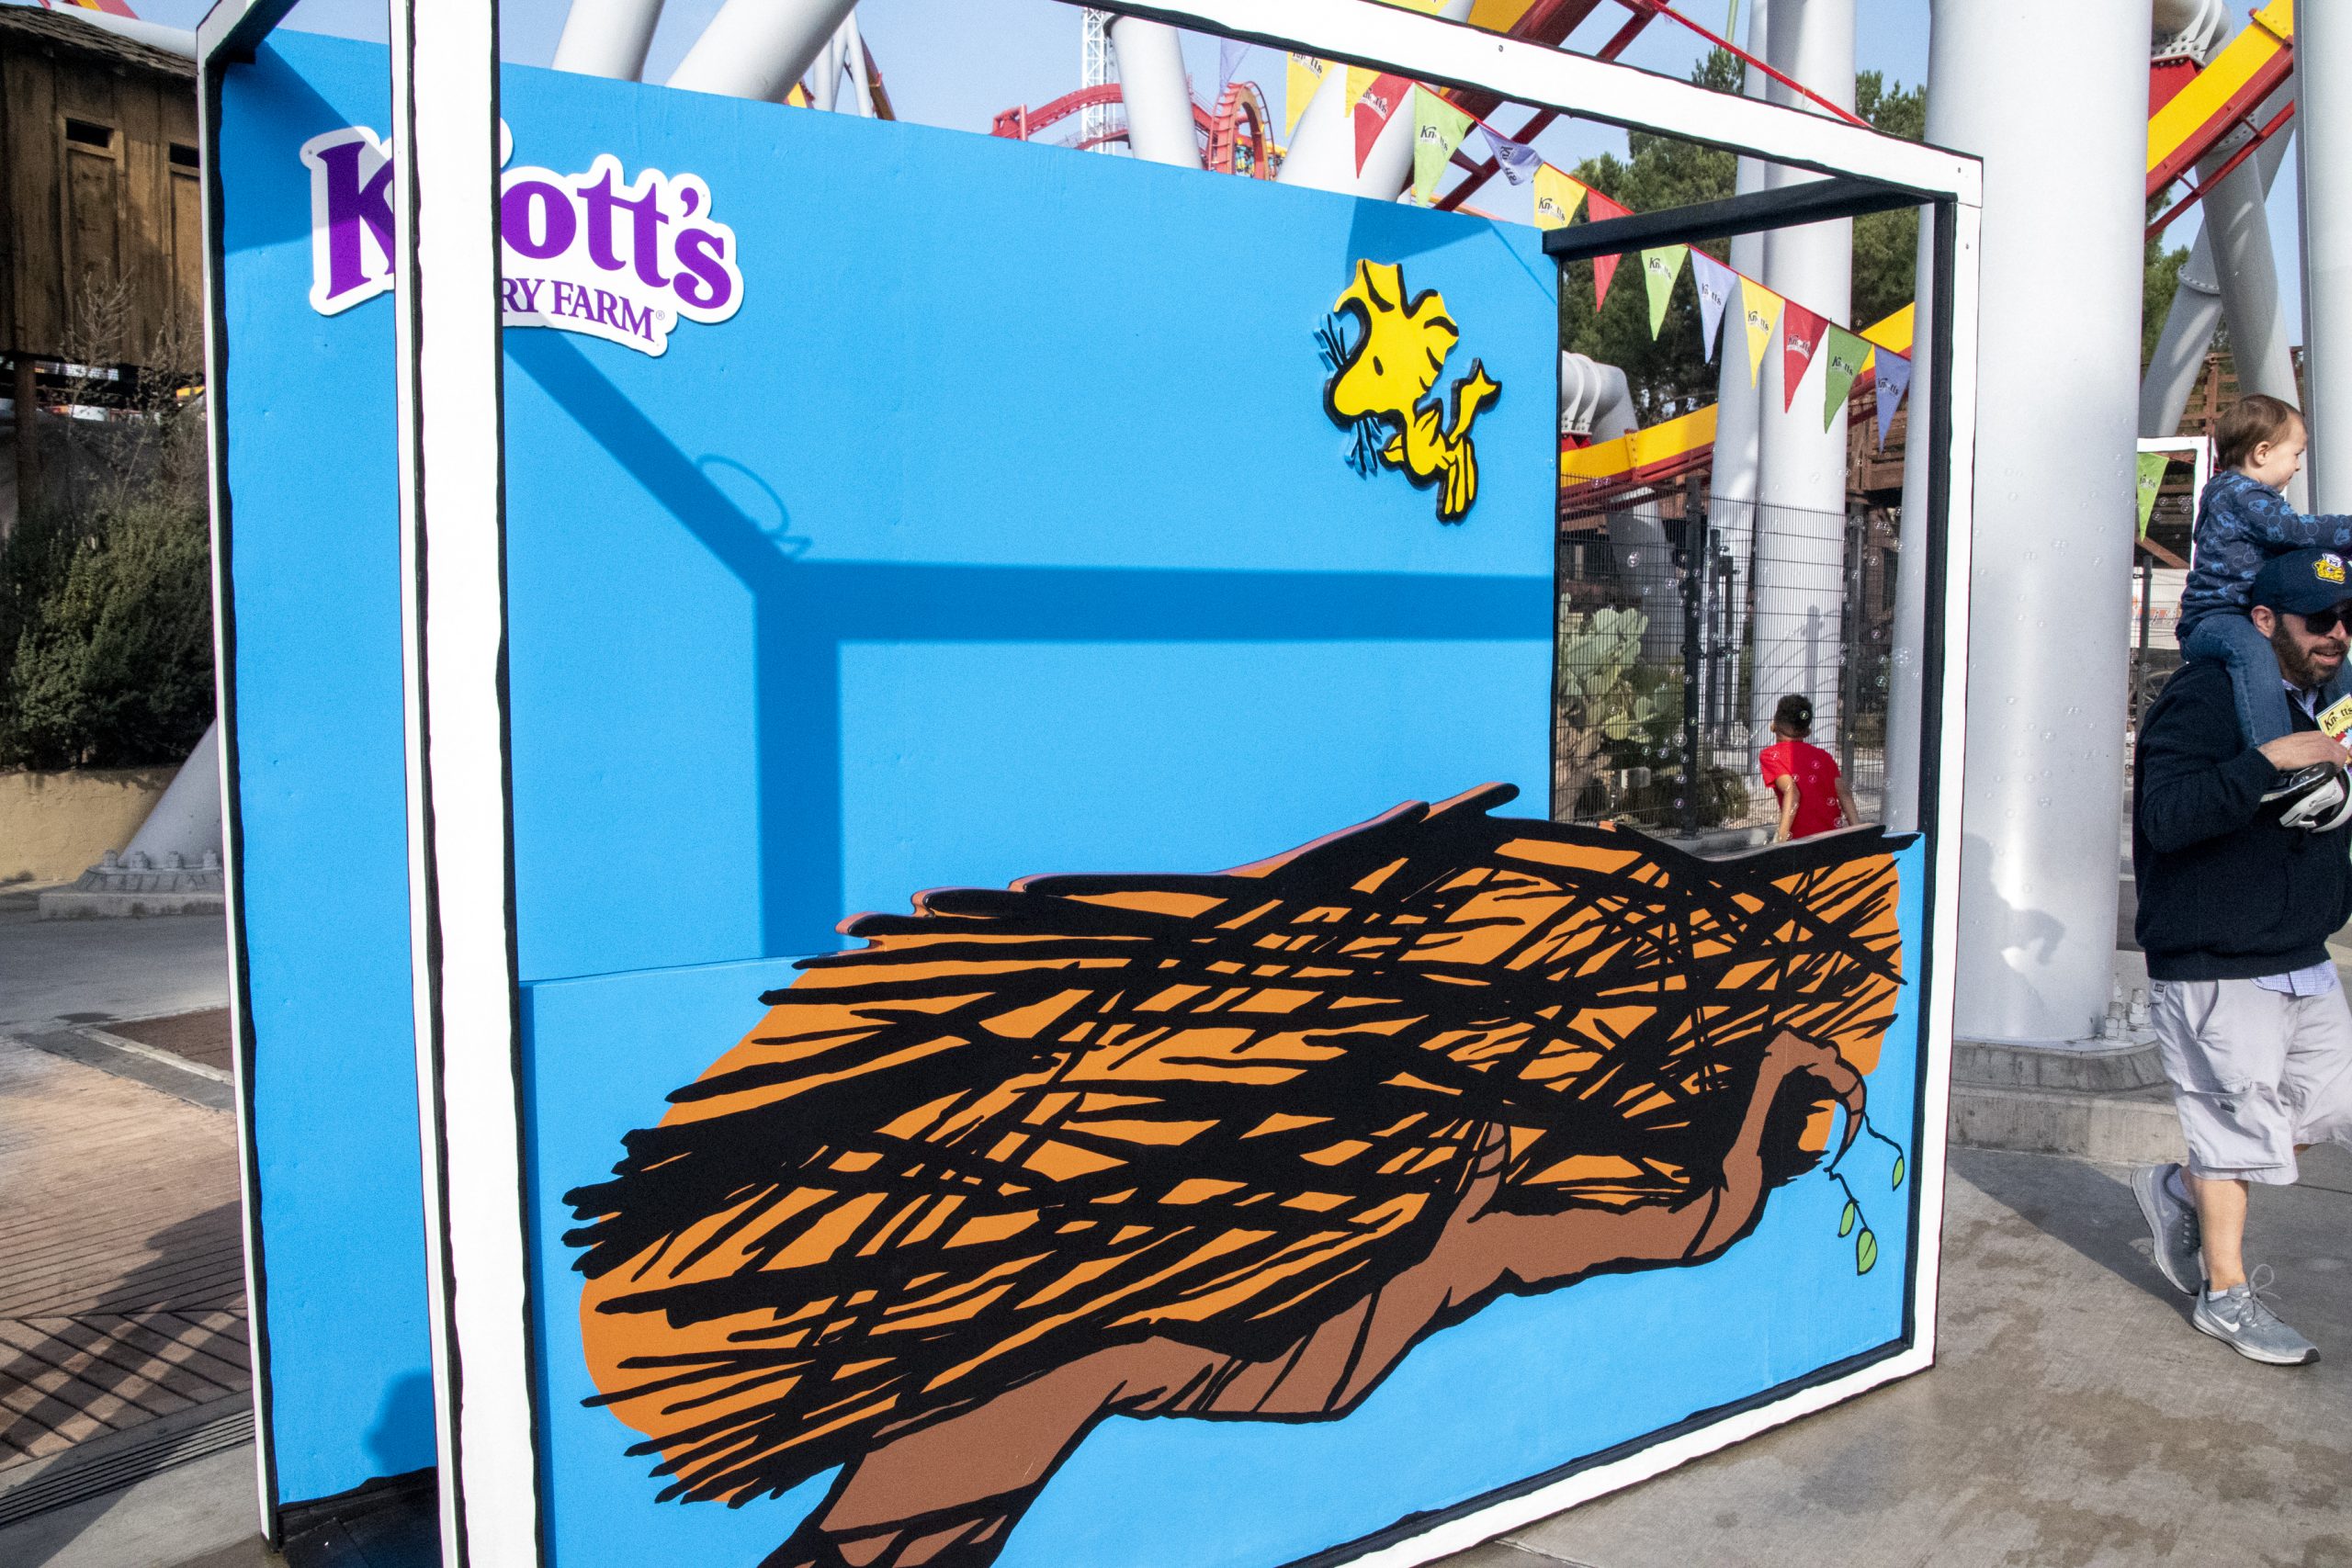 Knott’s Peanuts Celebration Brings New Features Daily This Year!